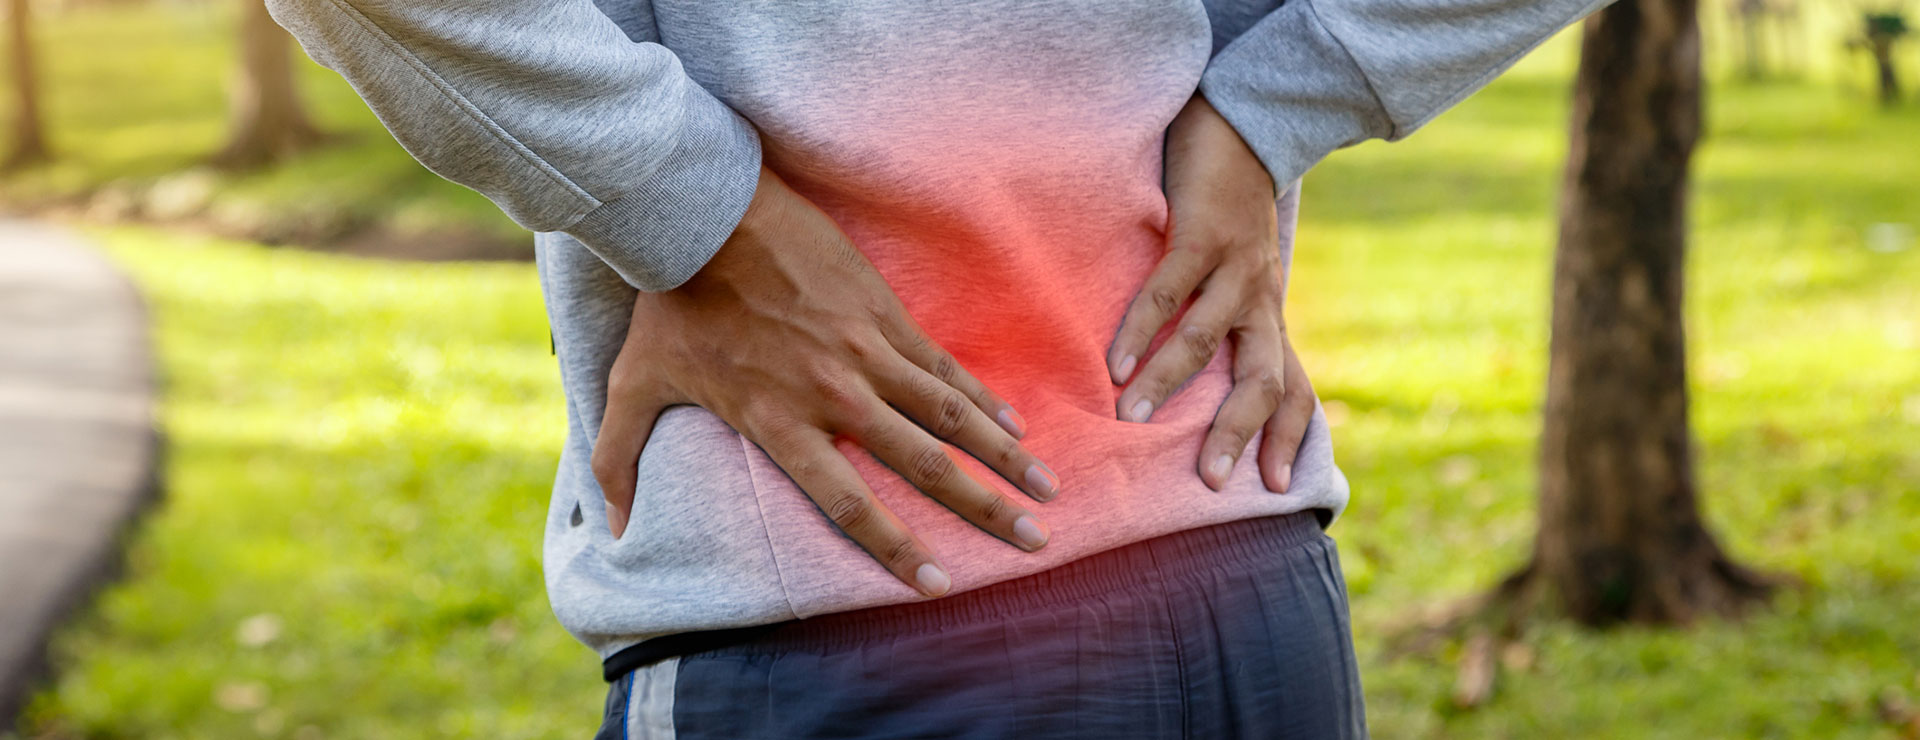 Lower Back Pain: What Could It Be? | Johns Hopkins Medicine